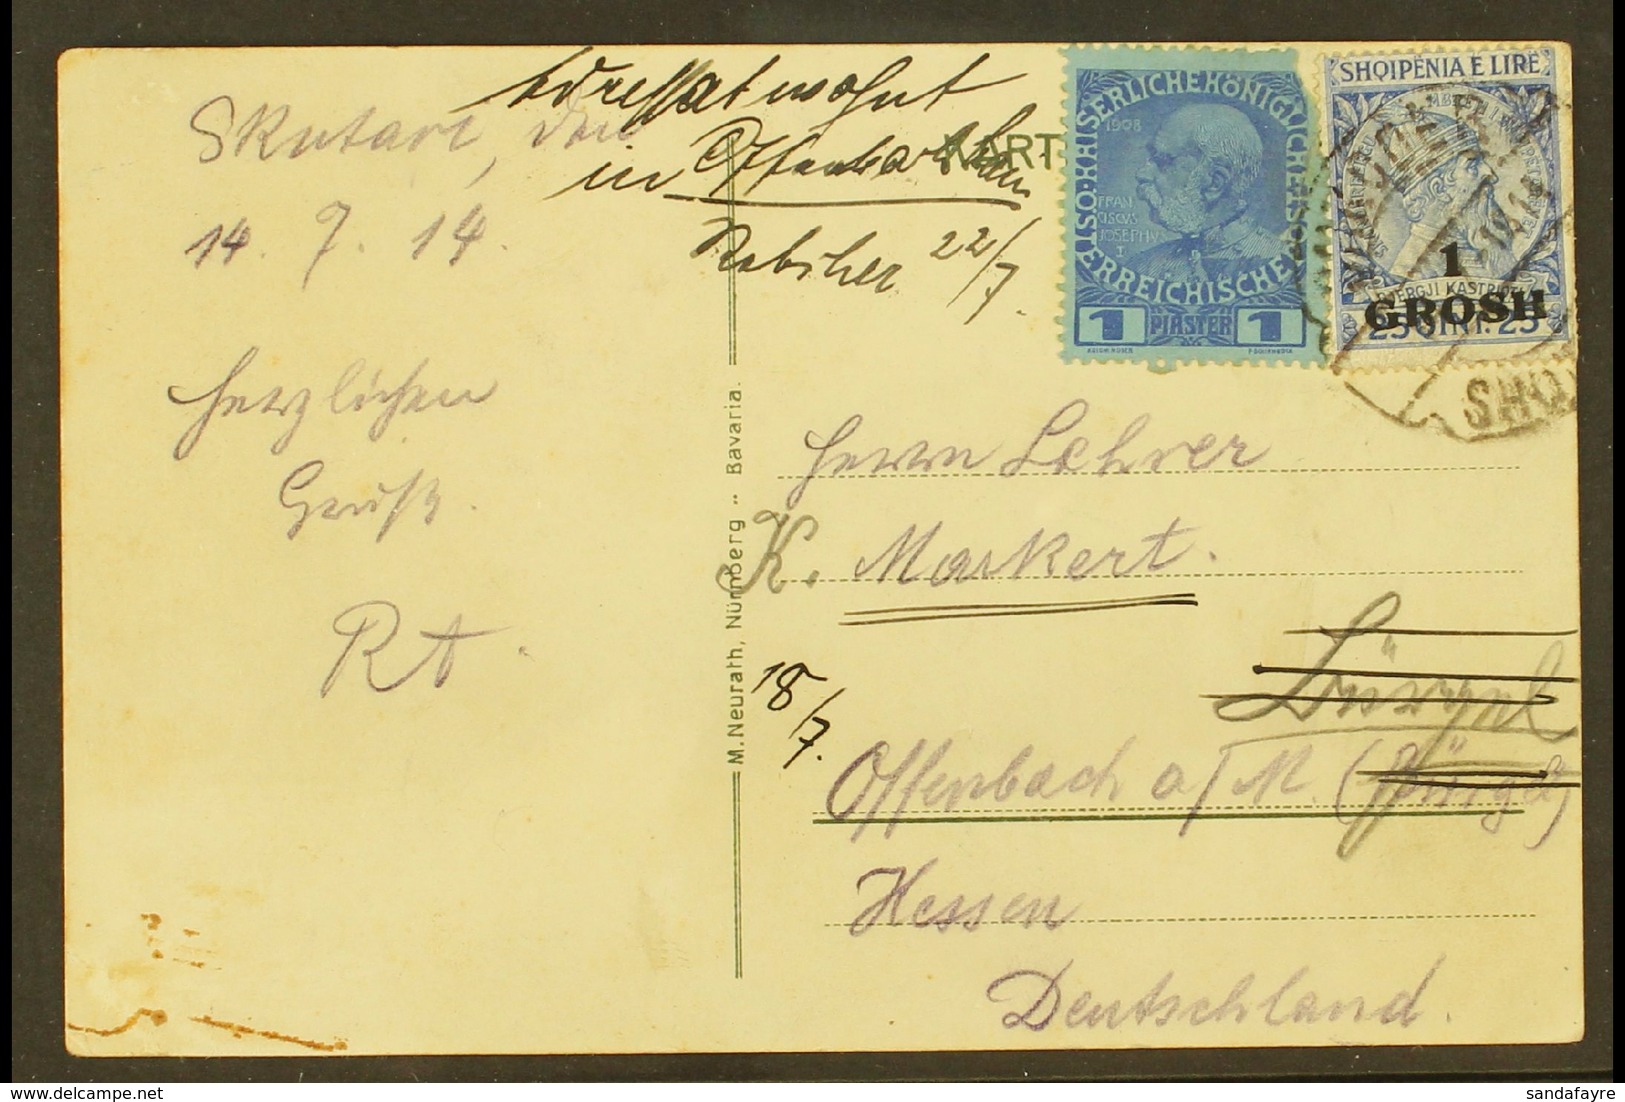 1914 MIXED FRANKING. (17 July) Picture Postcard To Germany, Redirected, Bearing Austrian PO's In Turkey 1914 1pi Stamp ( - Albania